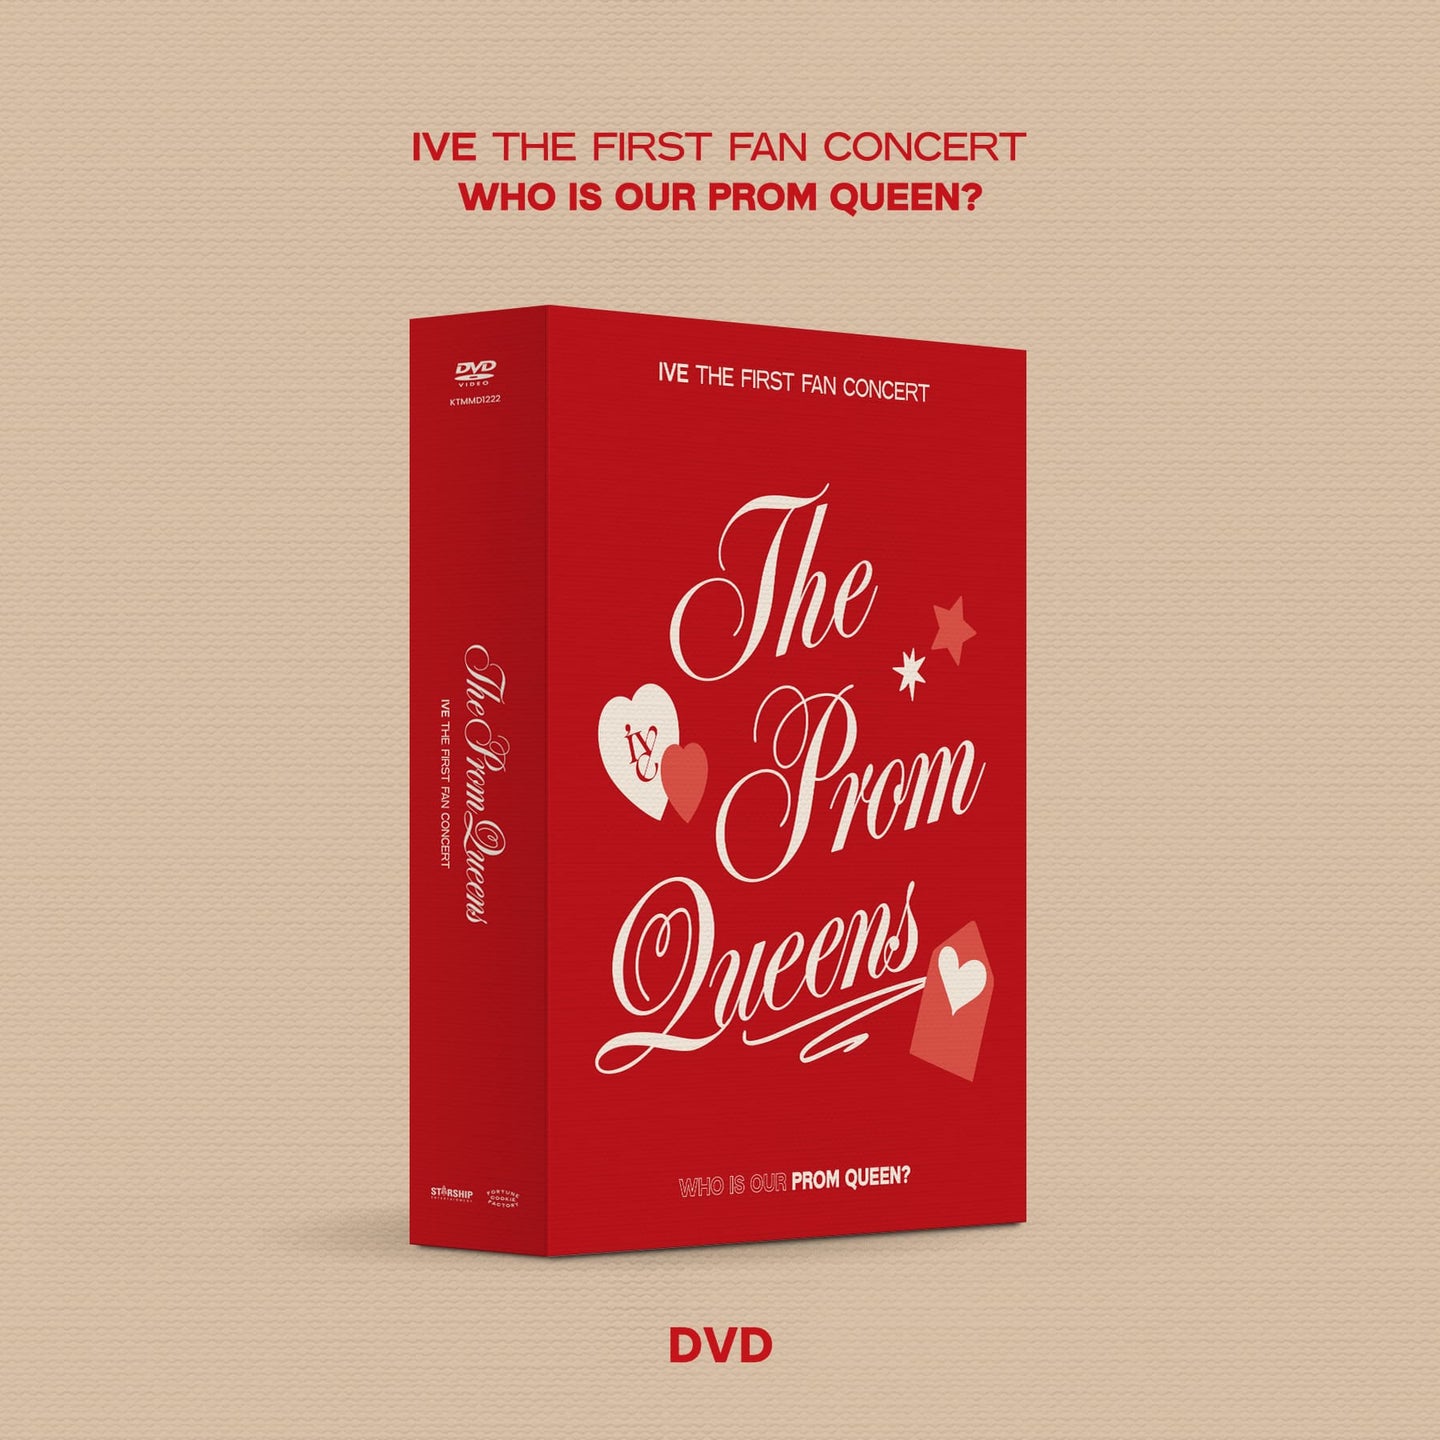 IVE - FIRST FAN CONCERT [The Prom Queens] DVD